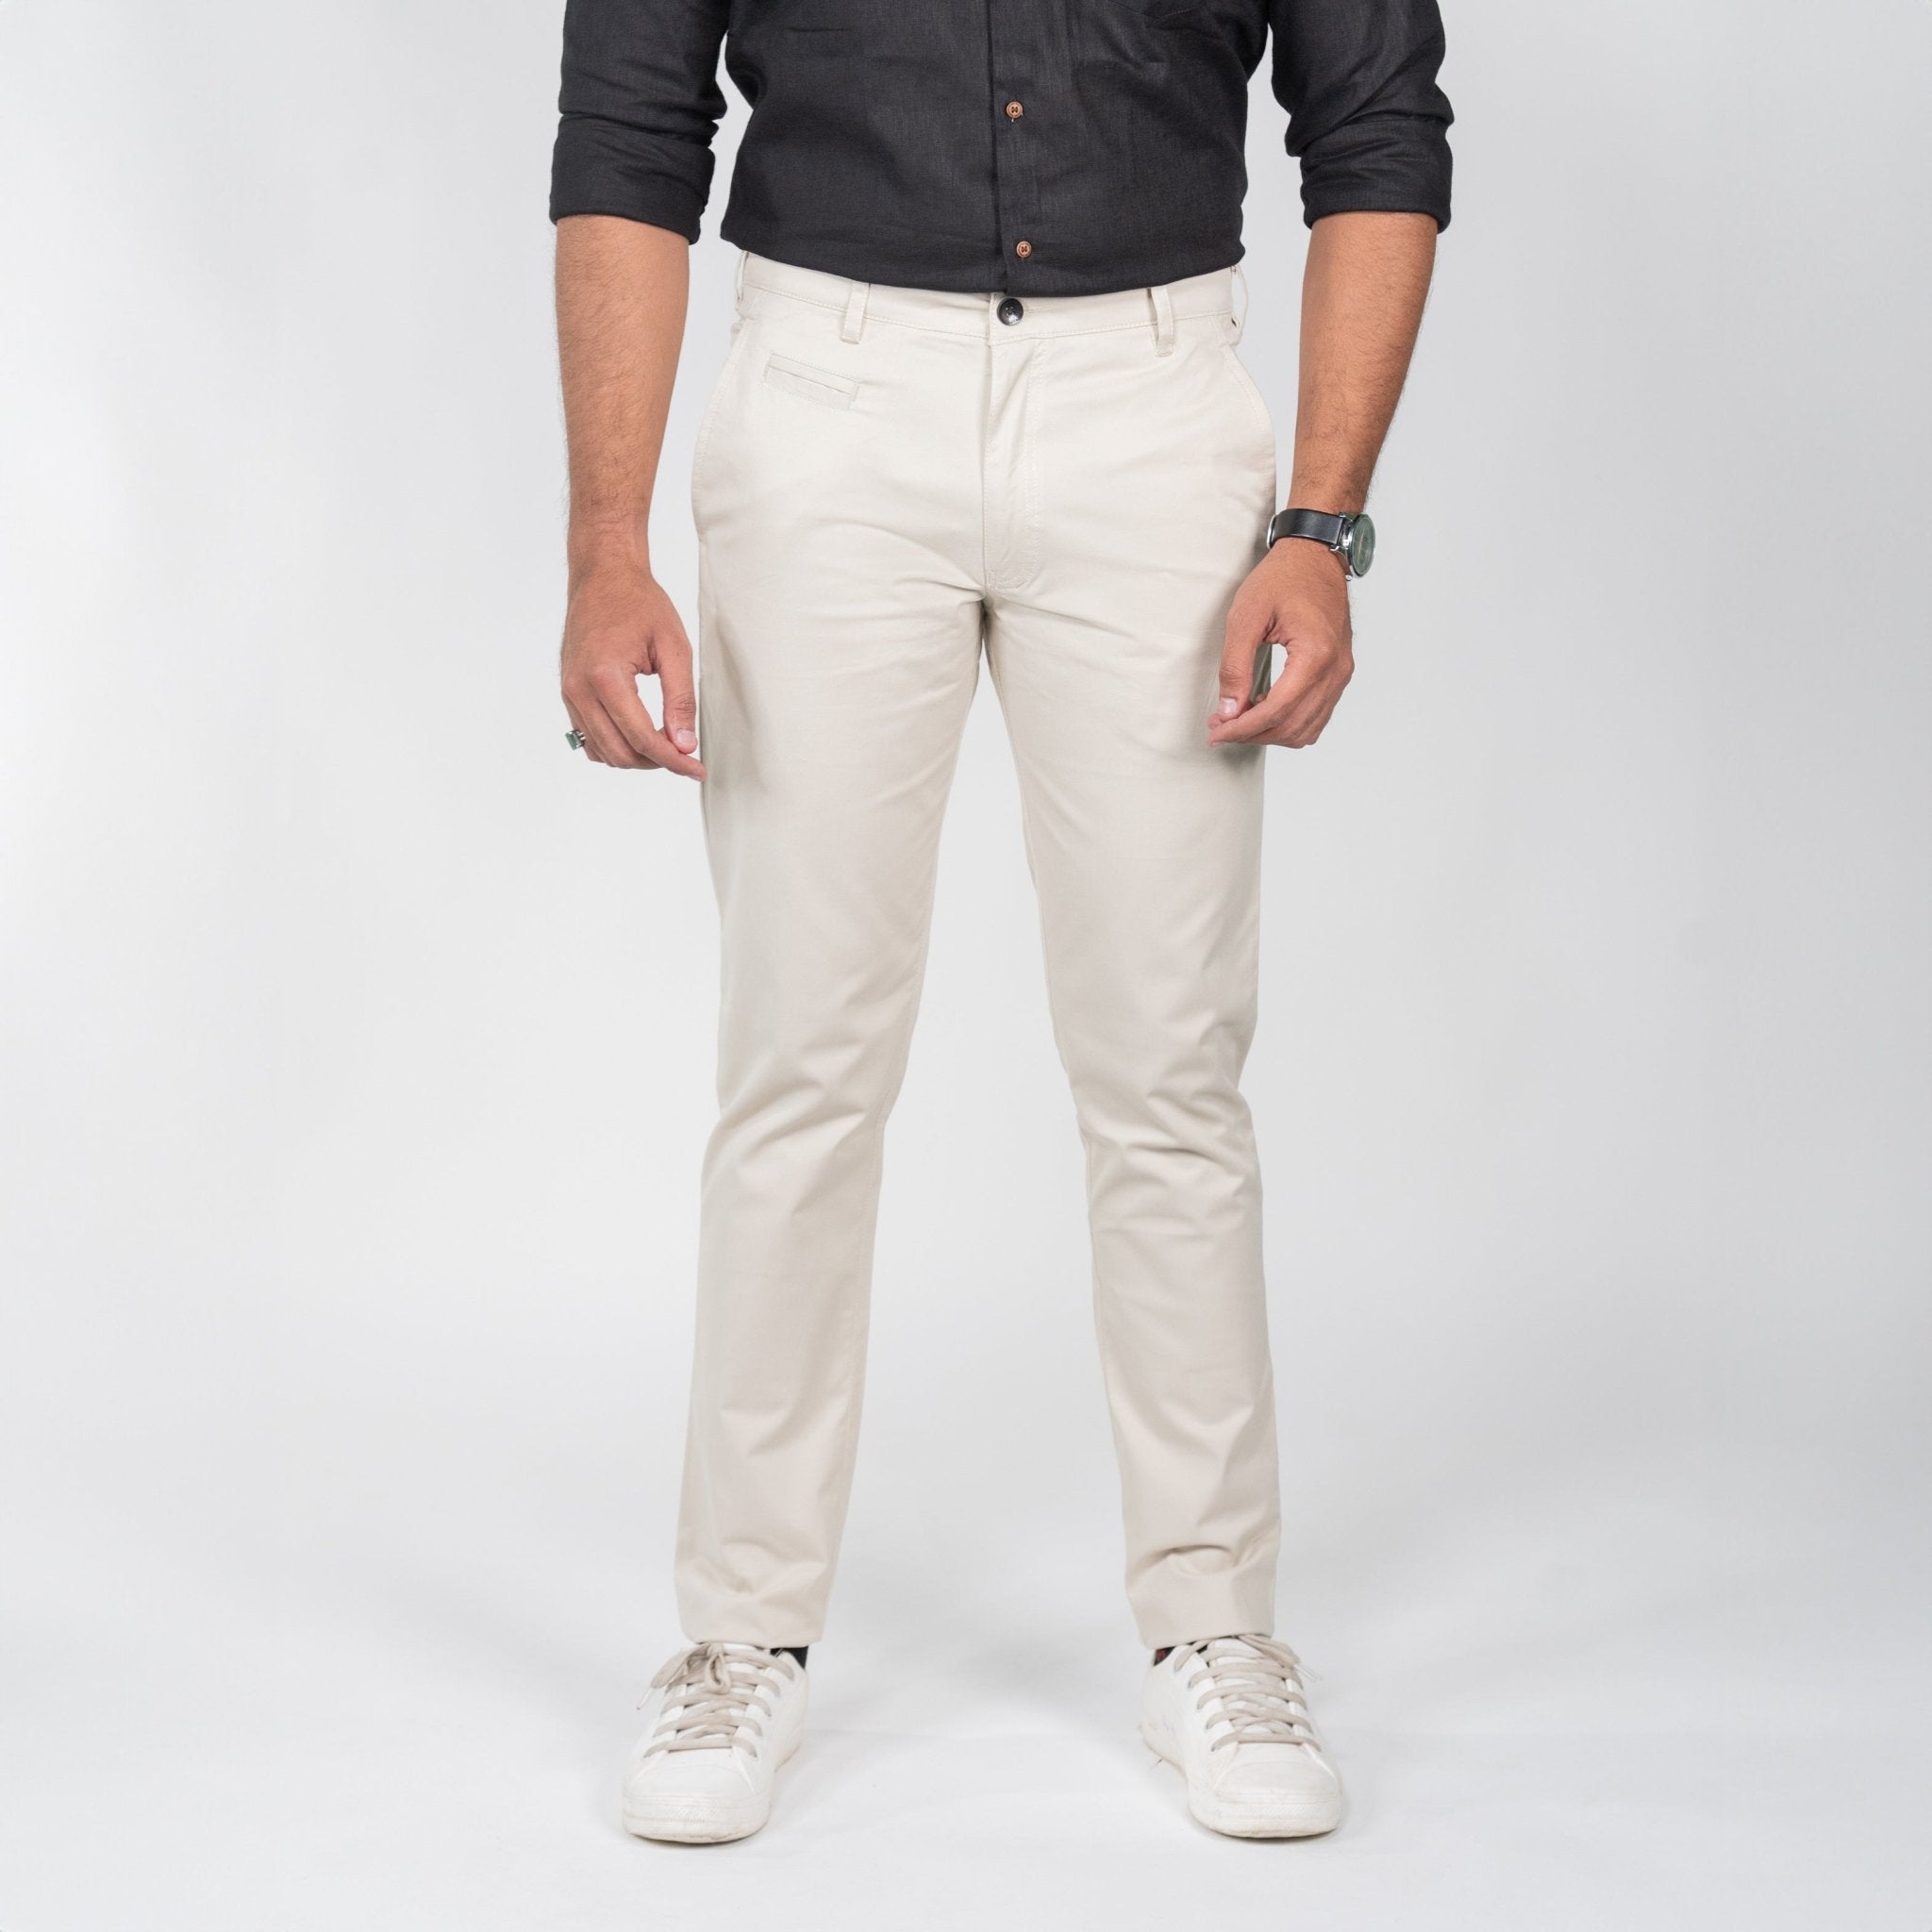 Uniqlo Men EZY Ankle Pants (2 Way Stretch) - Off White #GreatAsGifts, Men's  Fashion, Bottoms, Trousers on Carousell